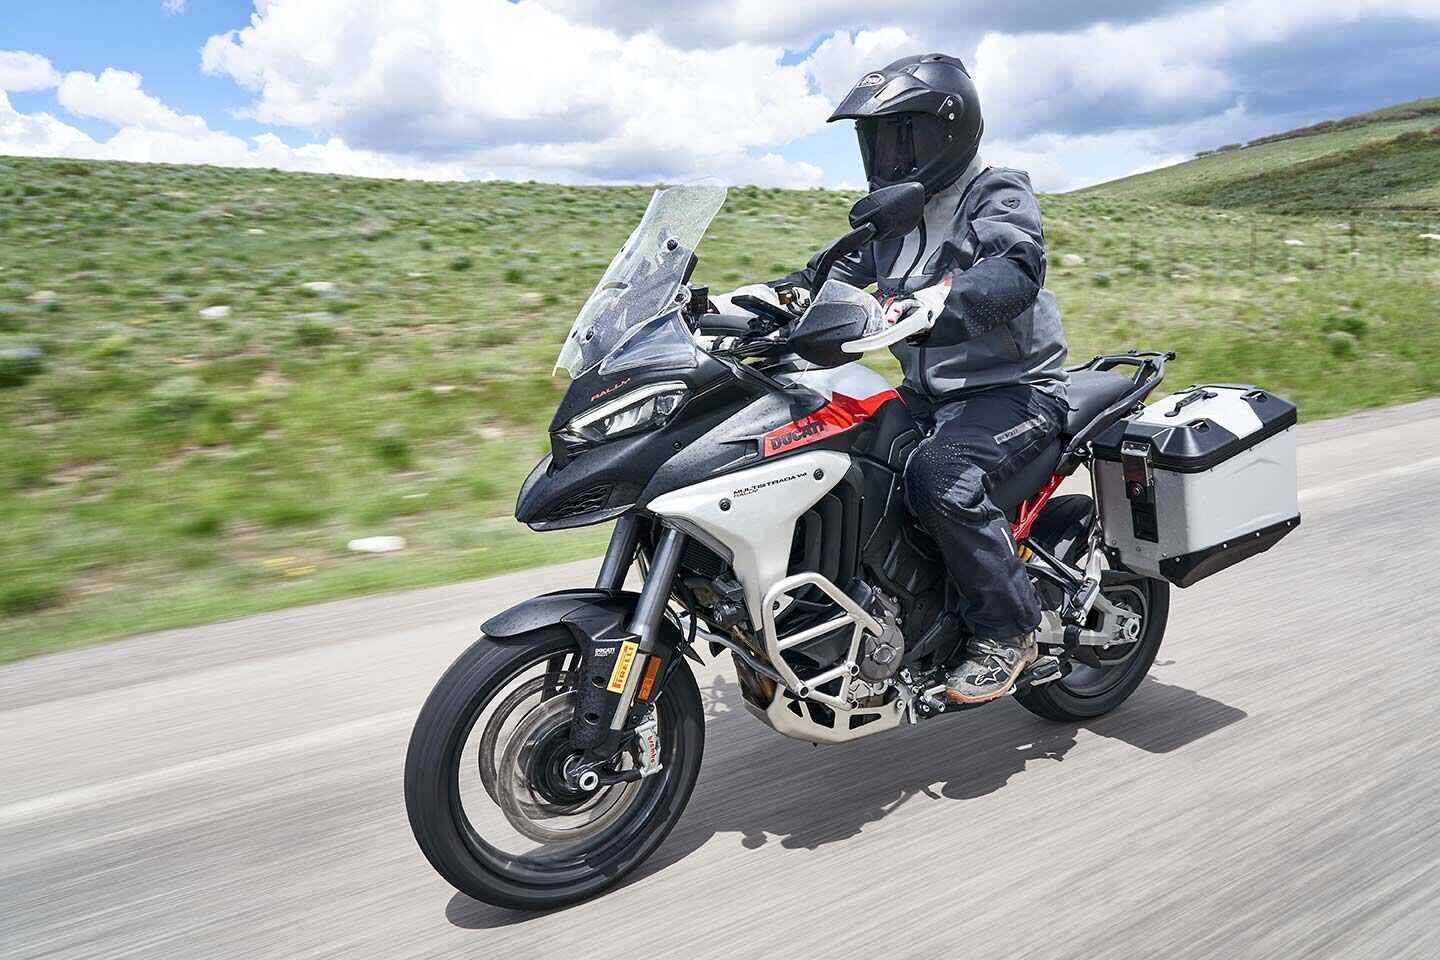 The Multistrada V4 Rally’s ergonomics are adaptable and comfortable for a variety of rider sizes.